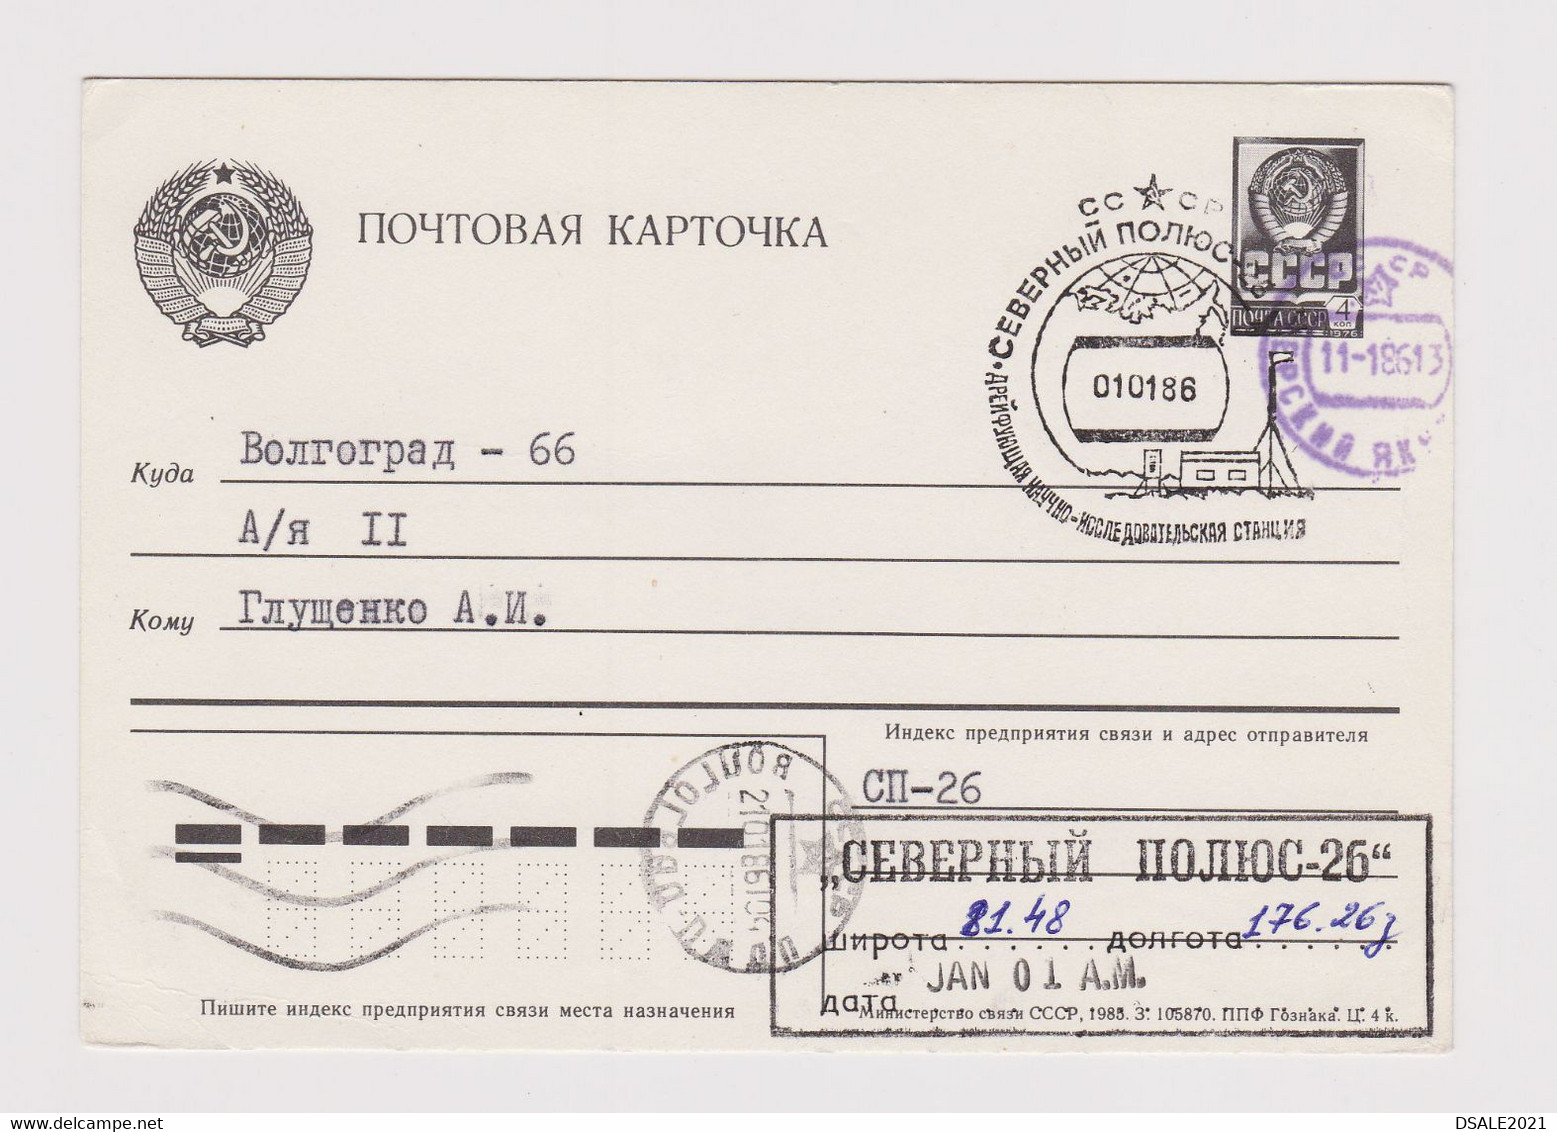 NP North Pole 1986 Soviet Russian USSR Staffed Drifting Ice Station North Pole-26 Stationery Card PSC (49132) - Scientific Stations & Arctic Drifting Stations